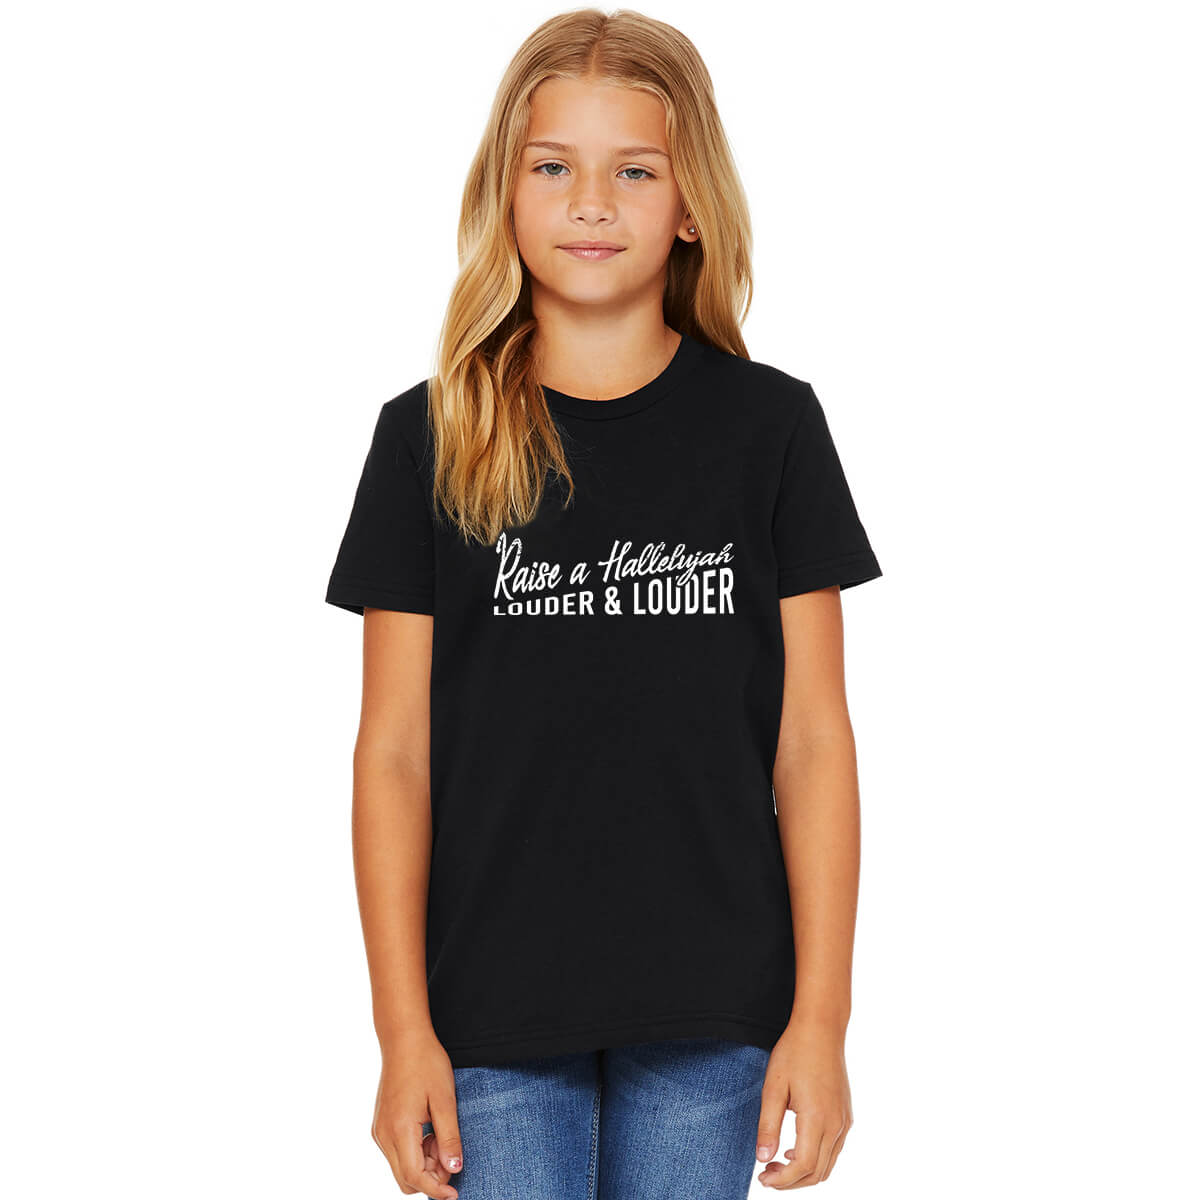 Raise A Hallelujah Youth T Shirt